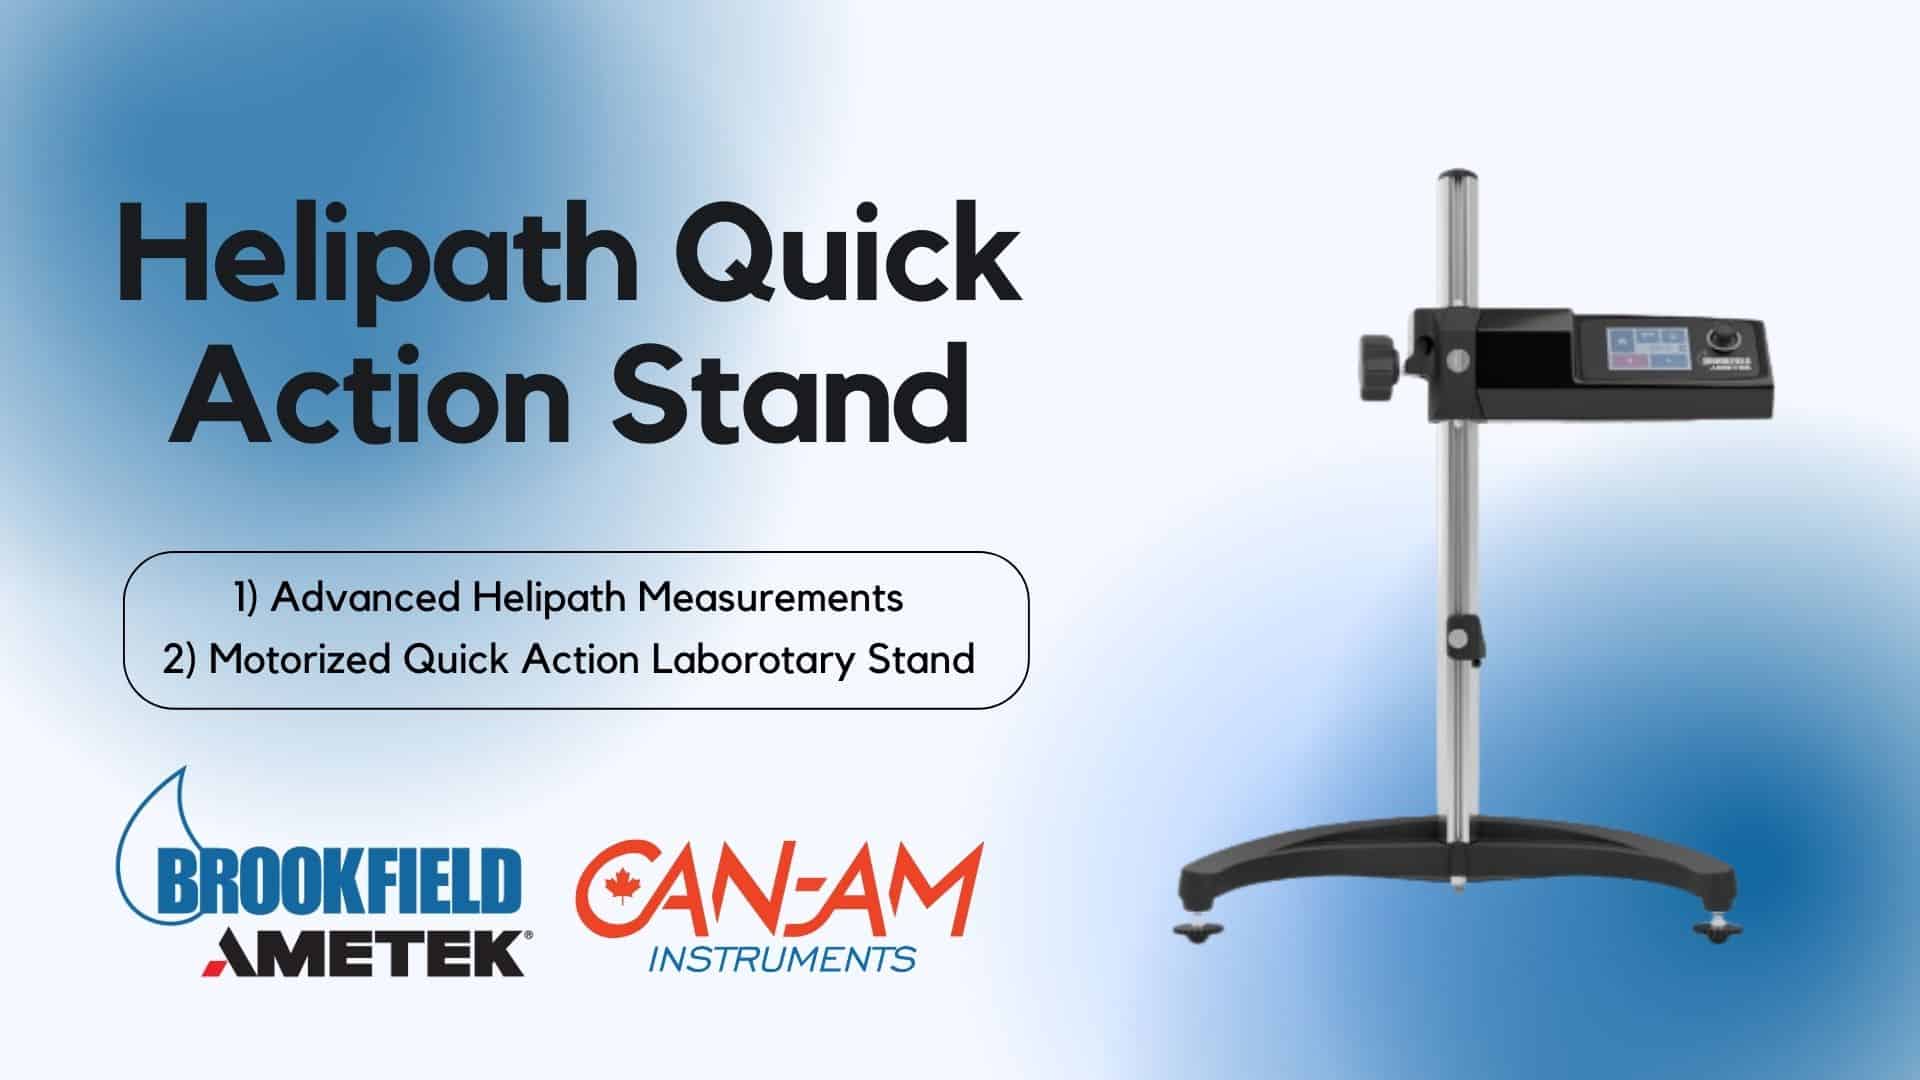 Press Release: Can-Am Instruments Introduces the Helipath Quick Action Stand Event Image